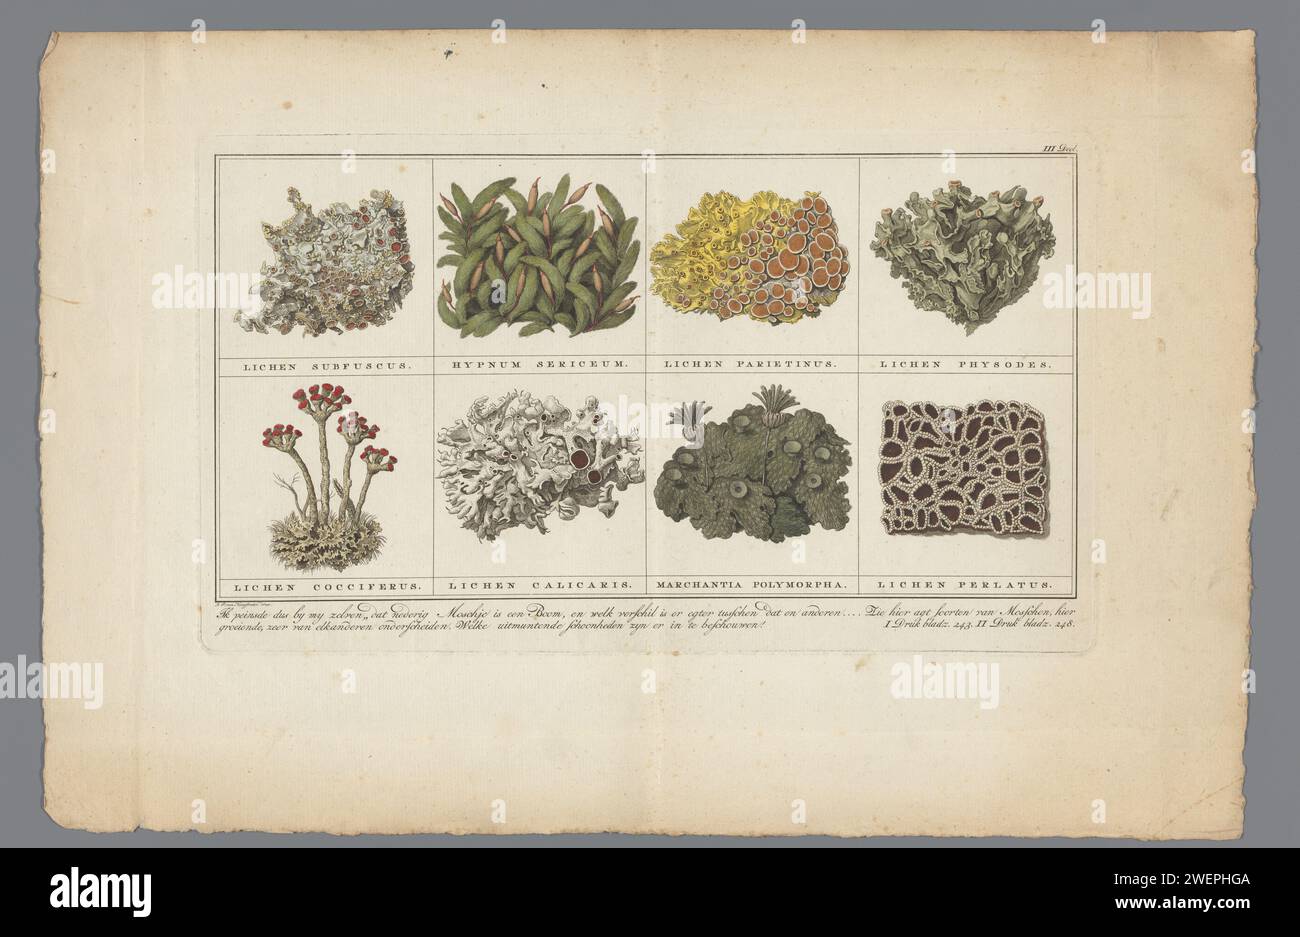 Eight types of mosses, J.P. van Hoogstraten (Possible), c. 1779 print Lichen puscus, hypnum silky, lichen parietinus, lichen physodes, lichen cocciferus, Lichen Calicaris, Marchant Polymorpha. Lichen was carried out.  paper. watercolor (paint) engraving / etching / brush mosses Stock Photo